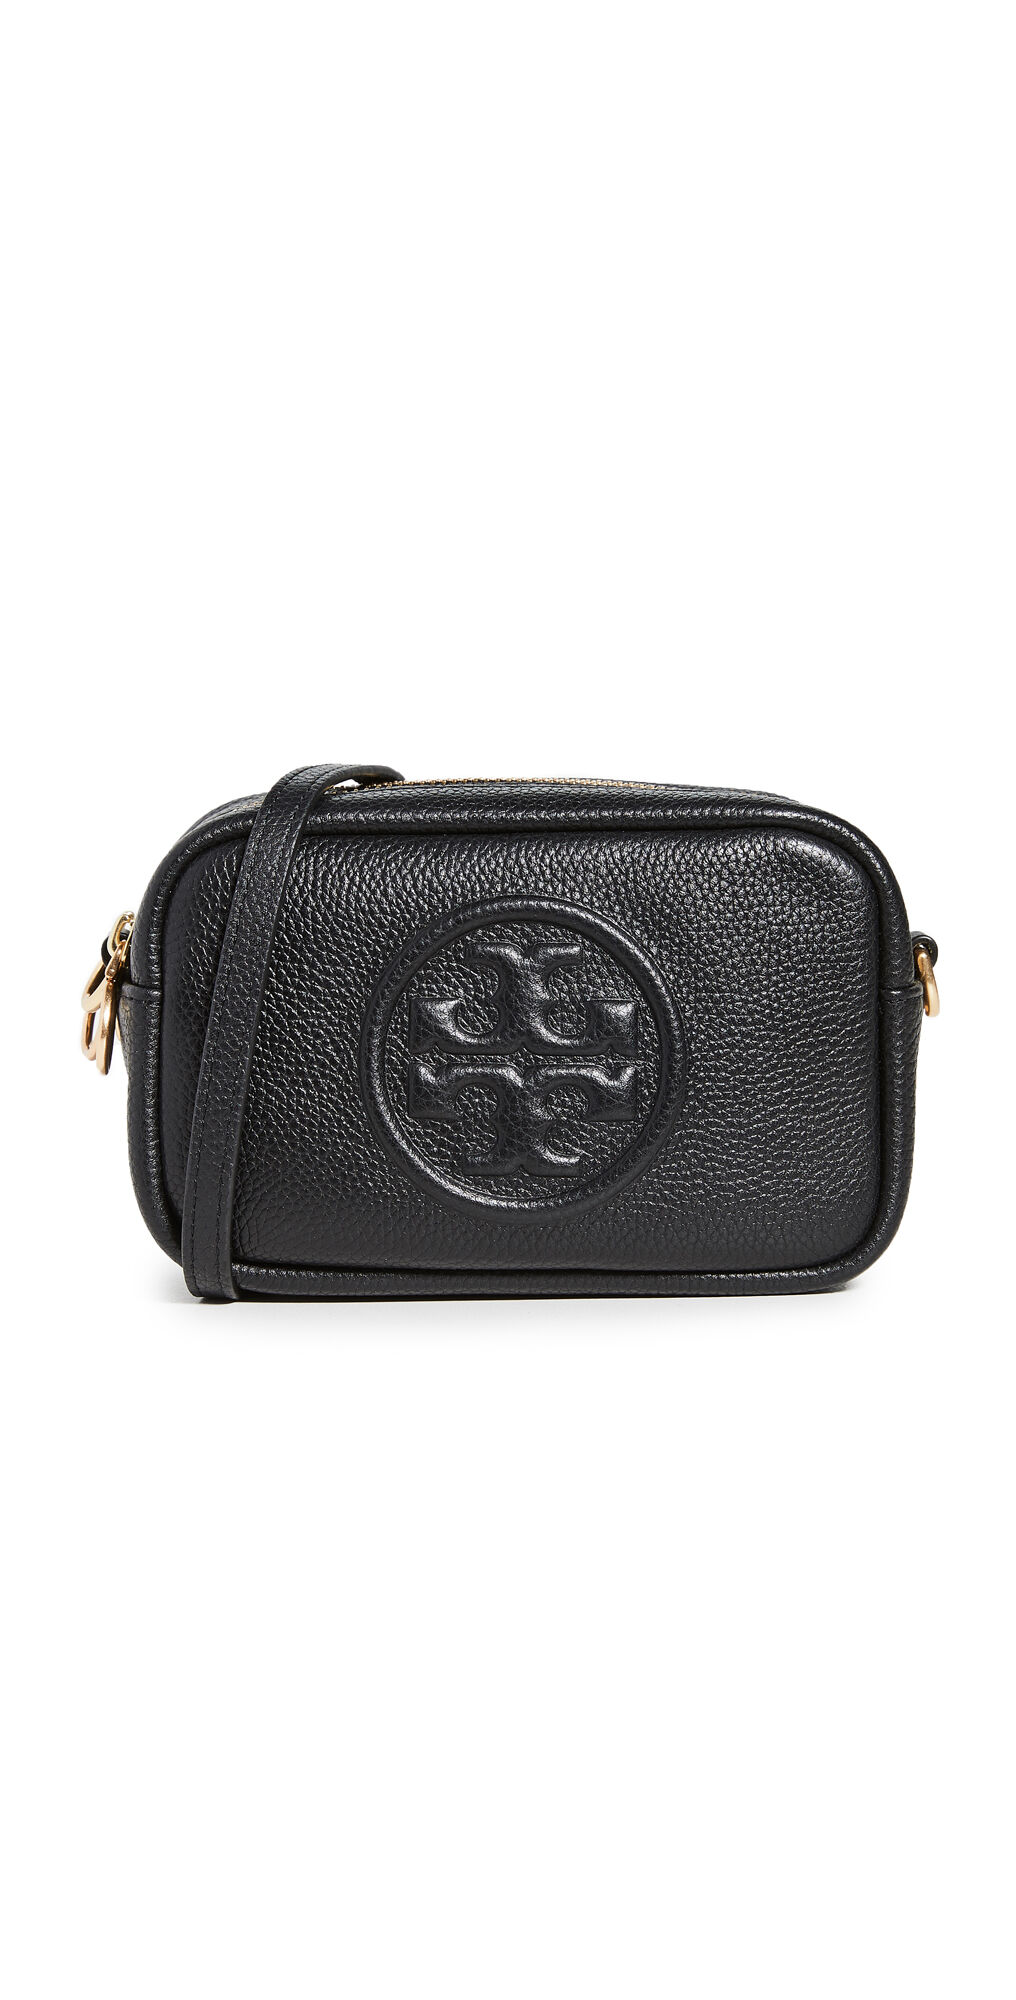 Tory Burch Perry Bombe Mini Bag Black One Size  Black  size:One Size